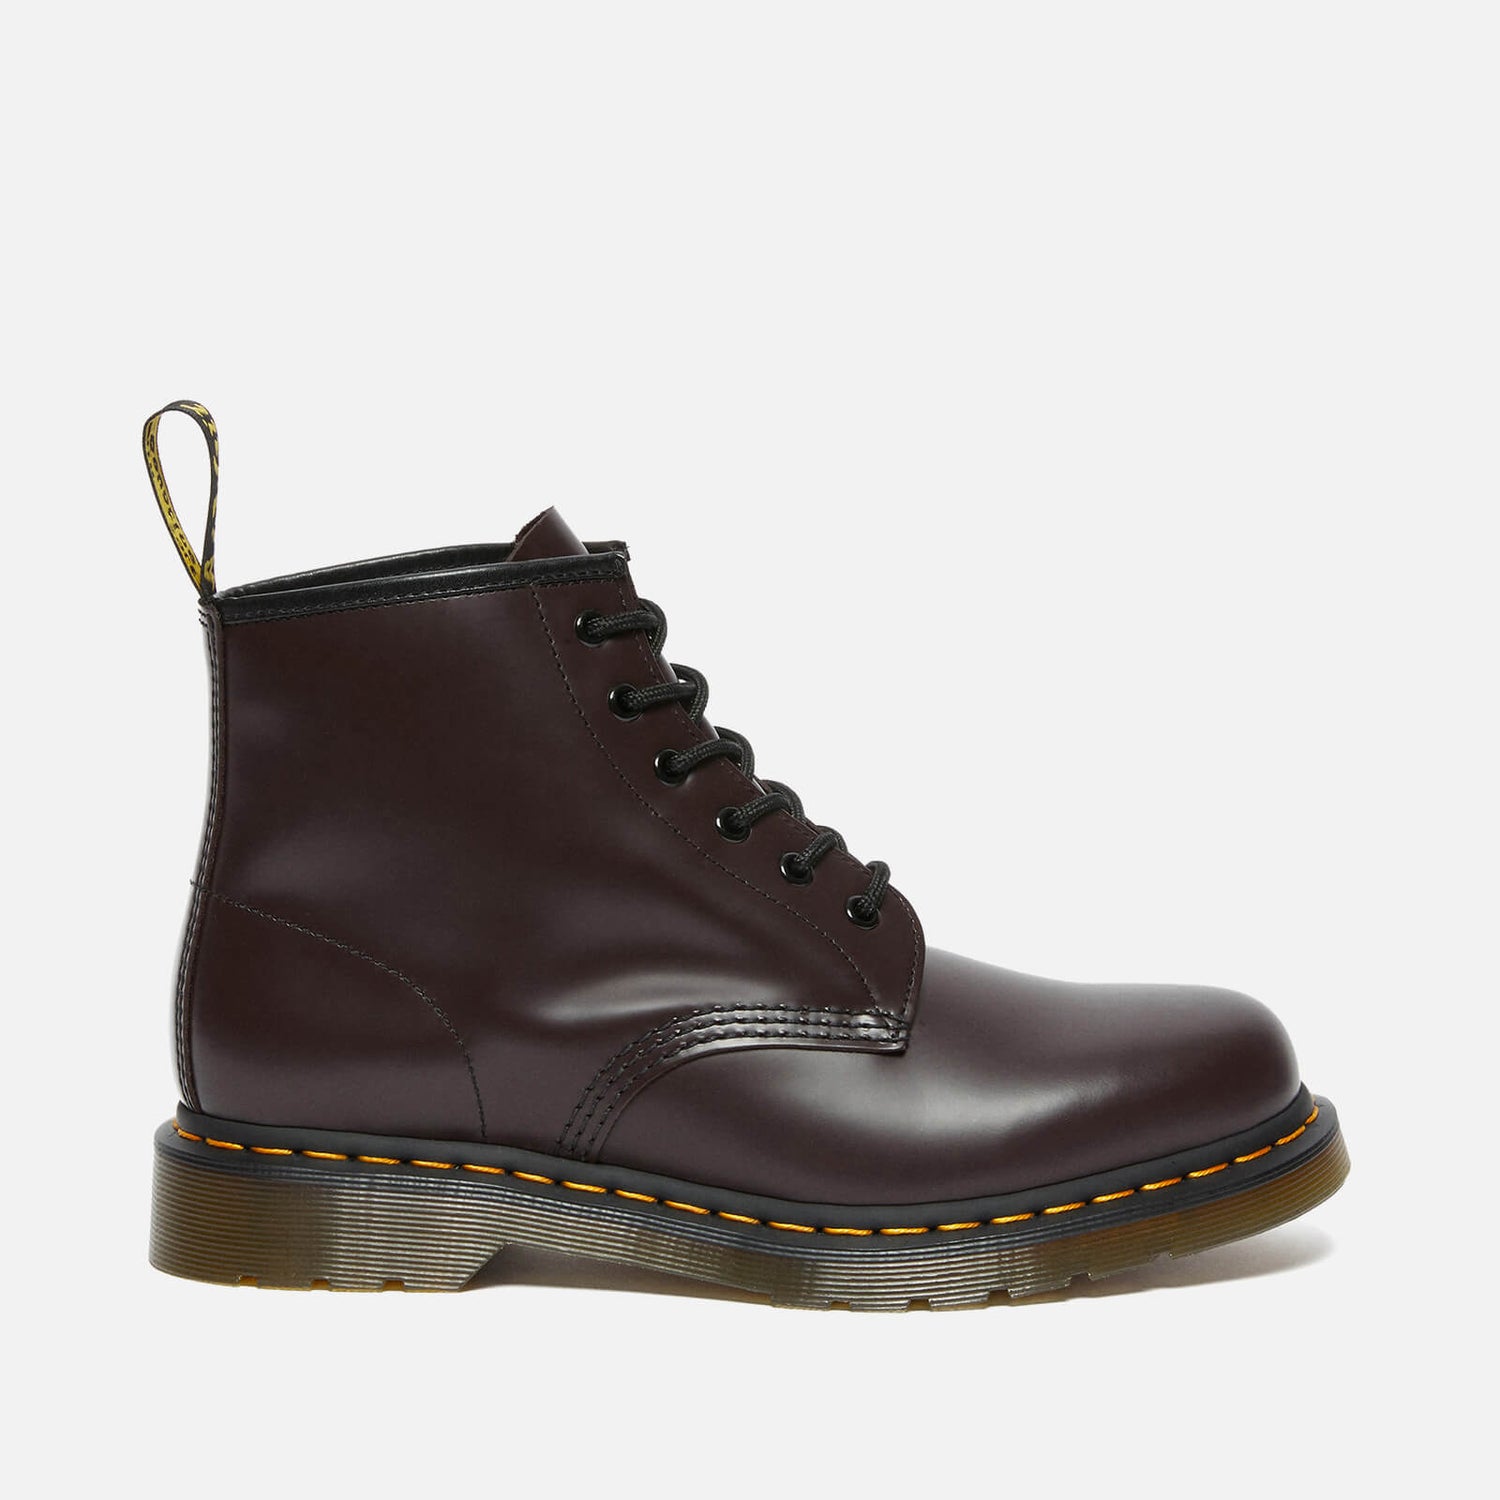 Dr. Martens 101 Leather 6-Eye Boots - UK 8